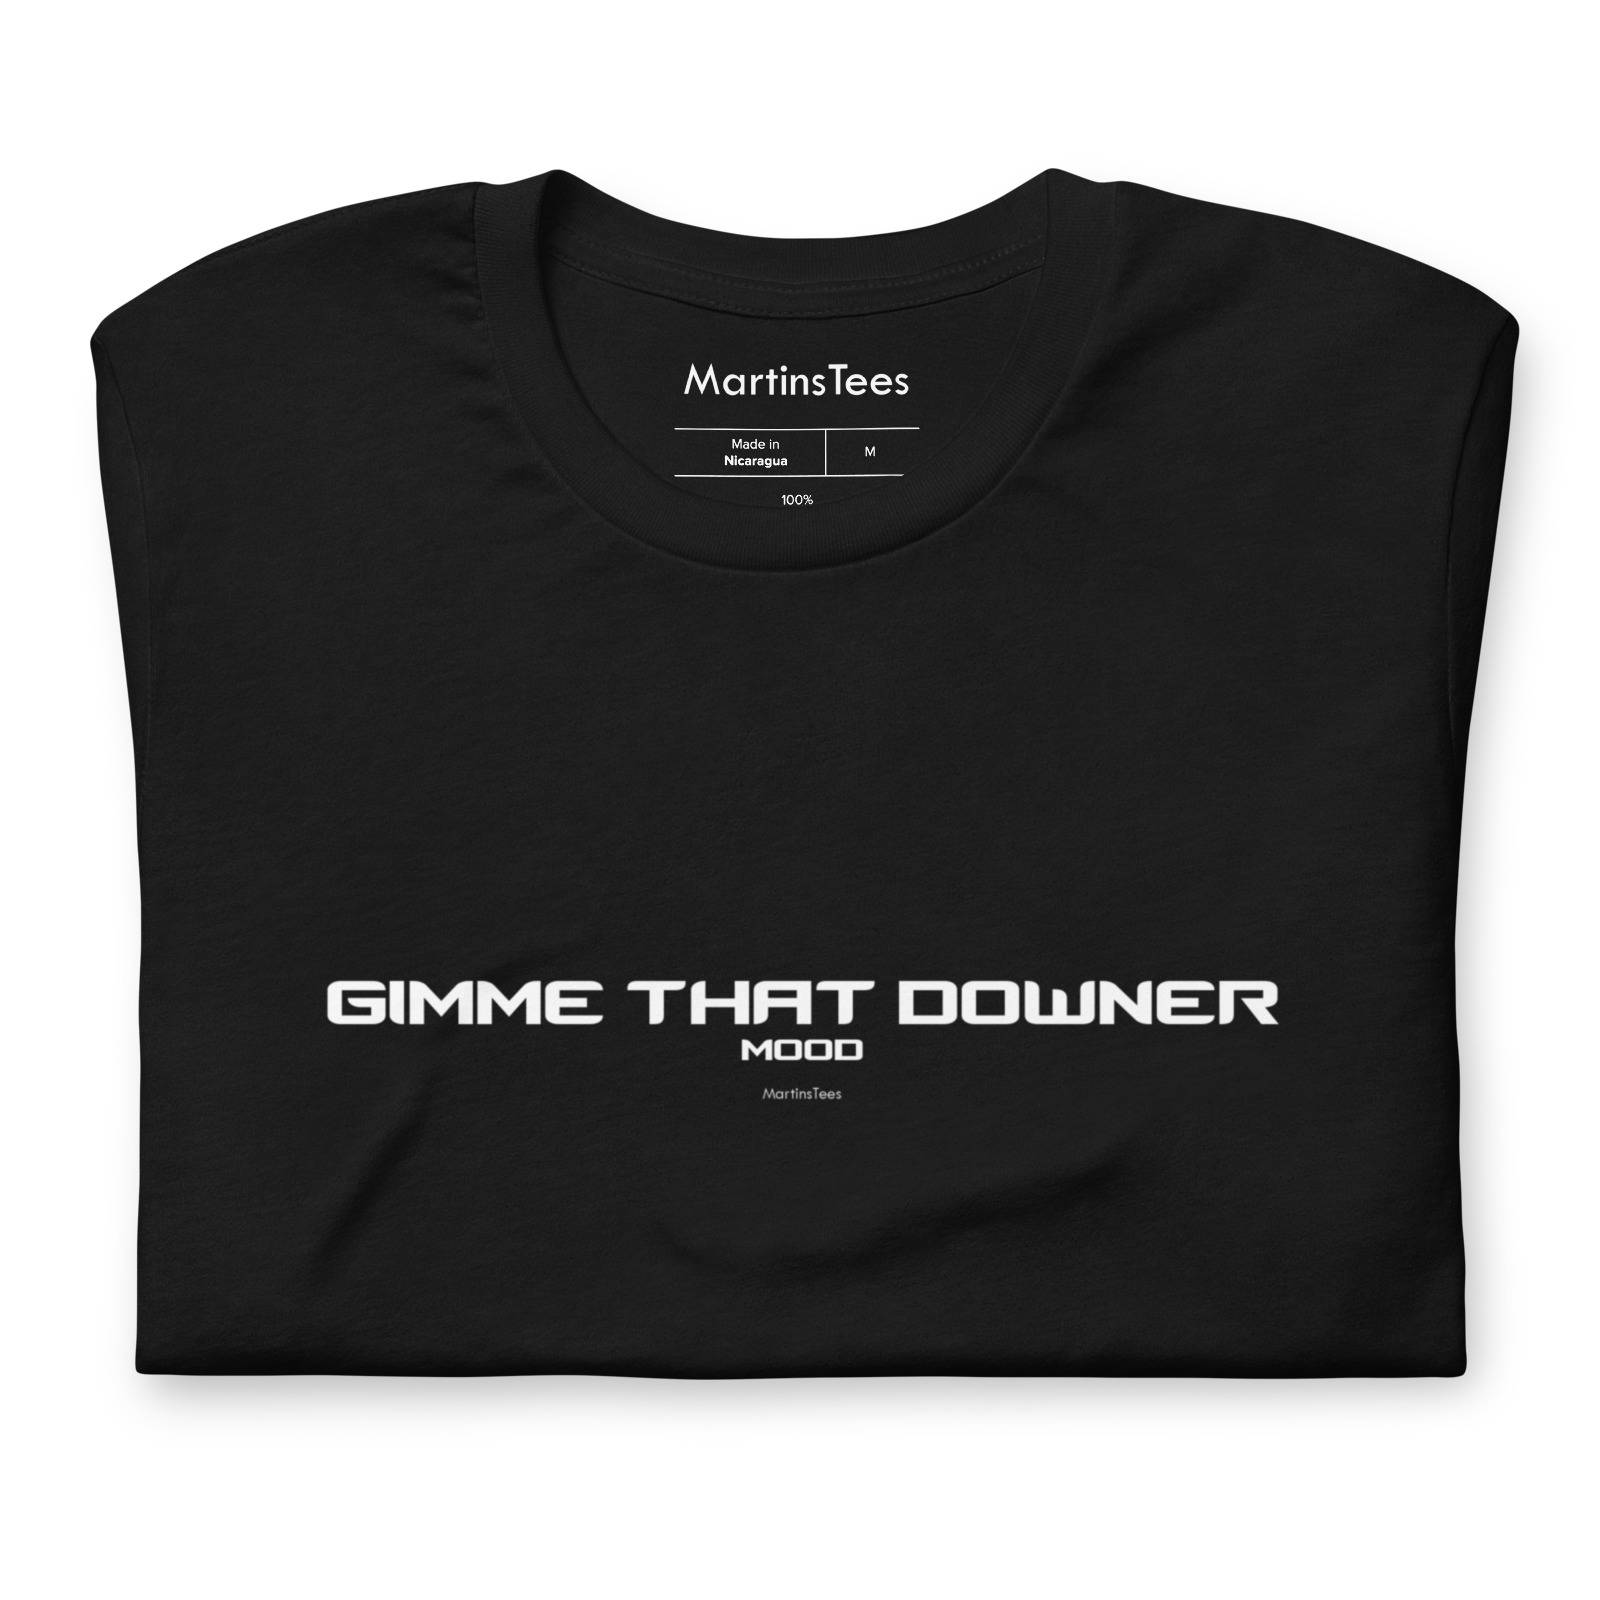 T-shirt: GIMME THAT DOWNER - MOOD